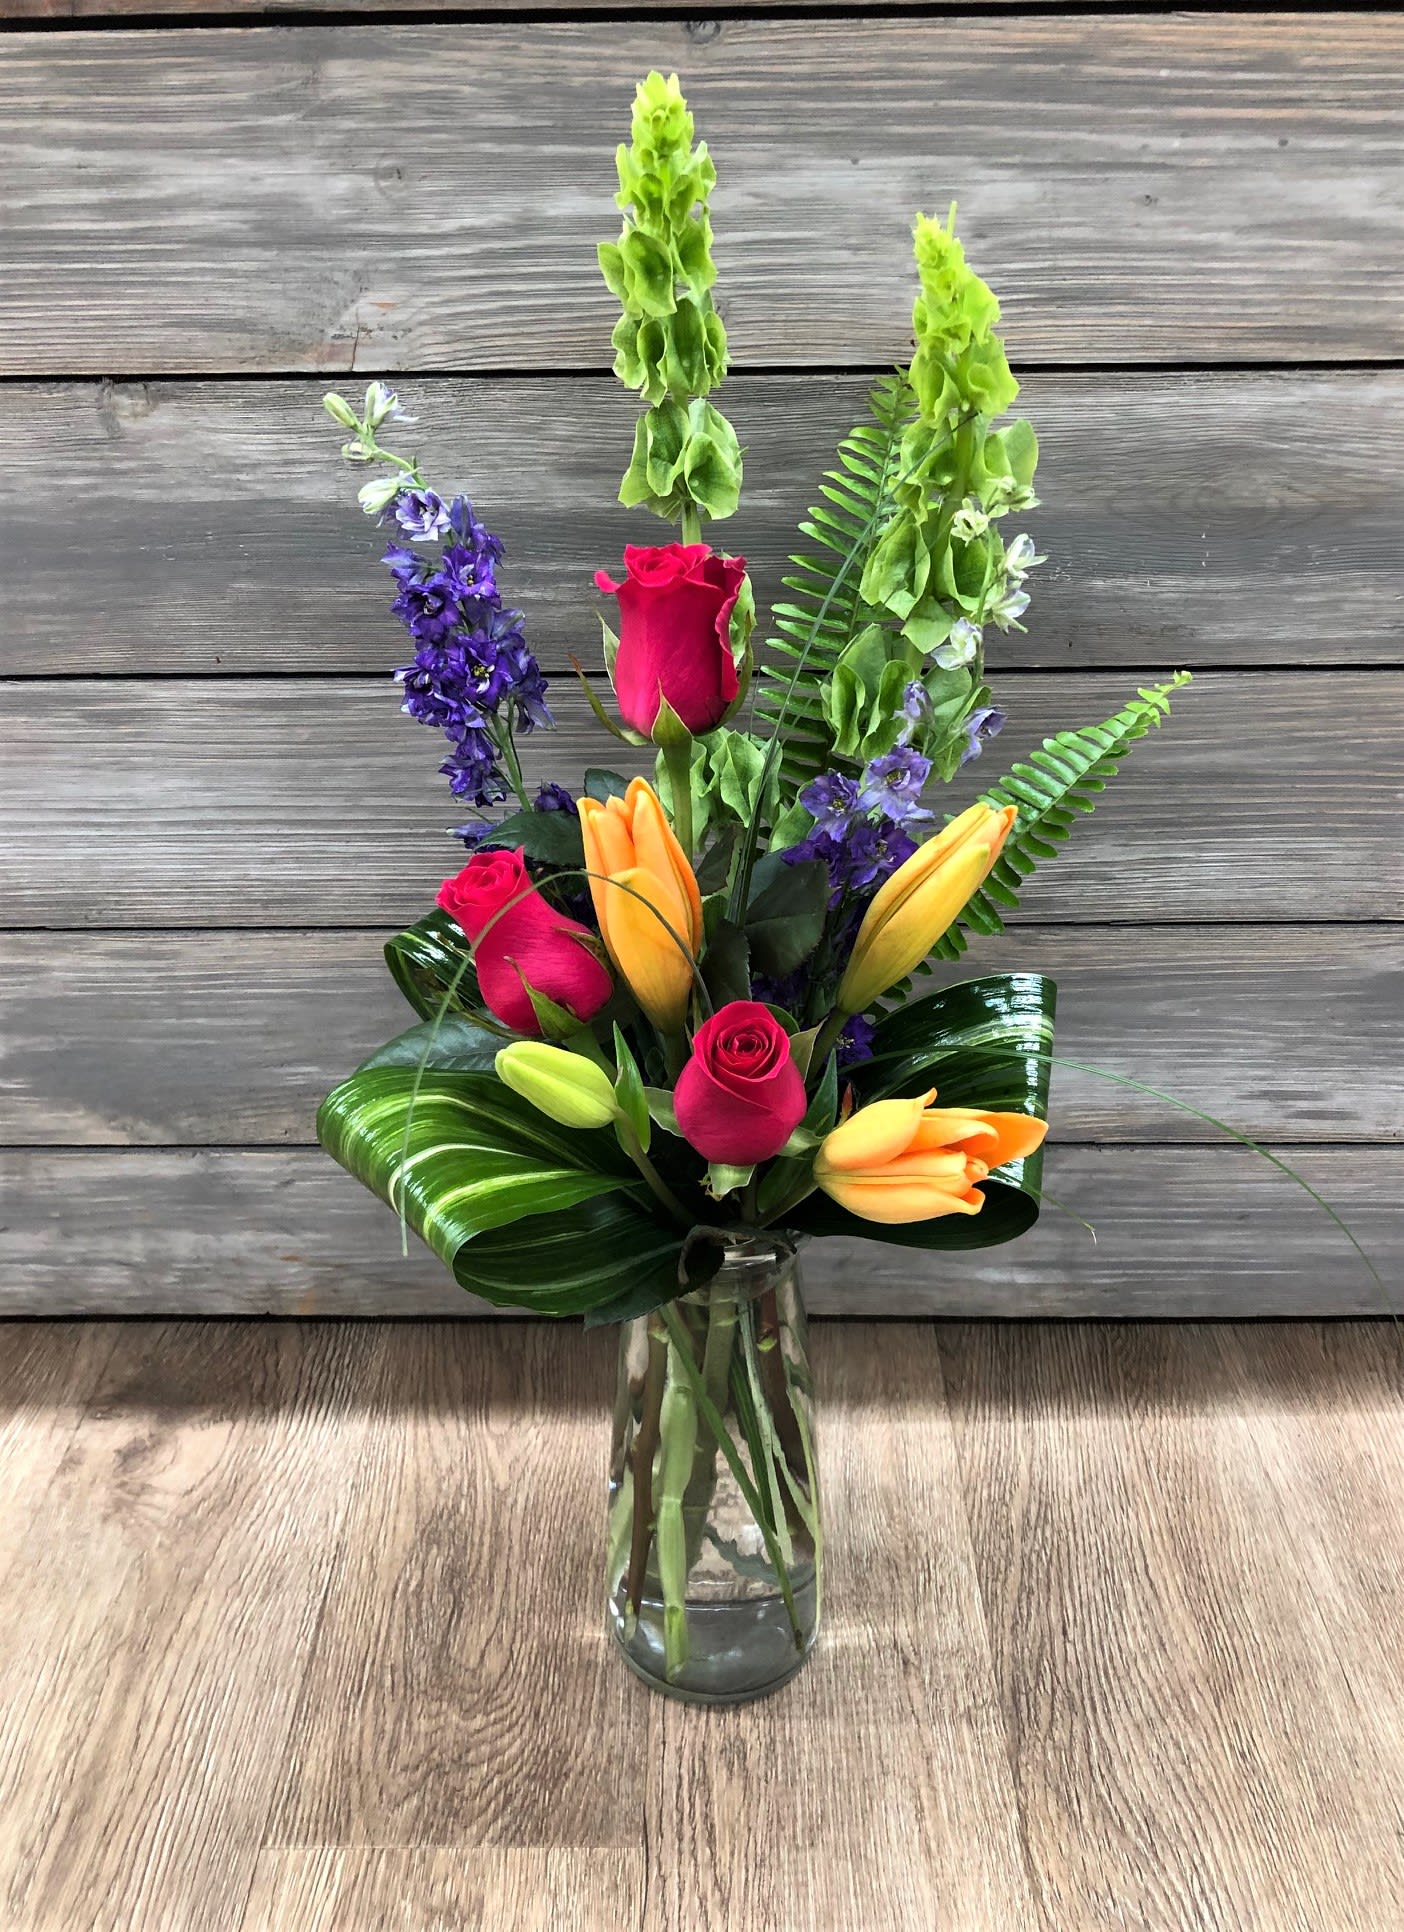 Brilliant Elegance Bouquet - Simple and elegant , yet bright and bold.  Lilies, roses, larkspurg and bells surrounded by aspidistra, fern and lily grass greenery  Vase may be substituted. 